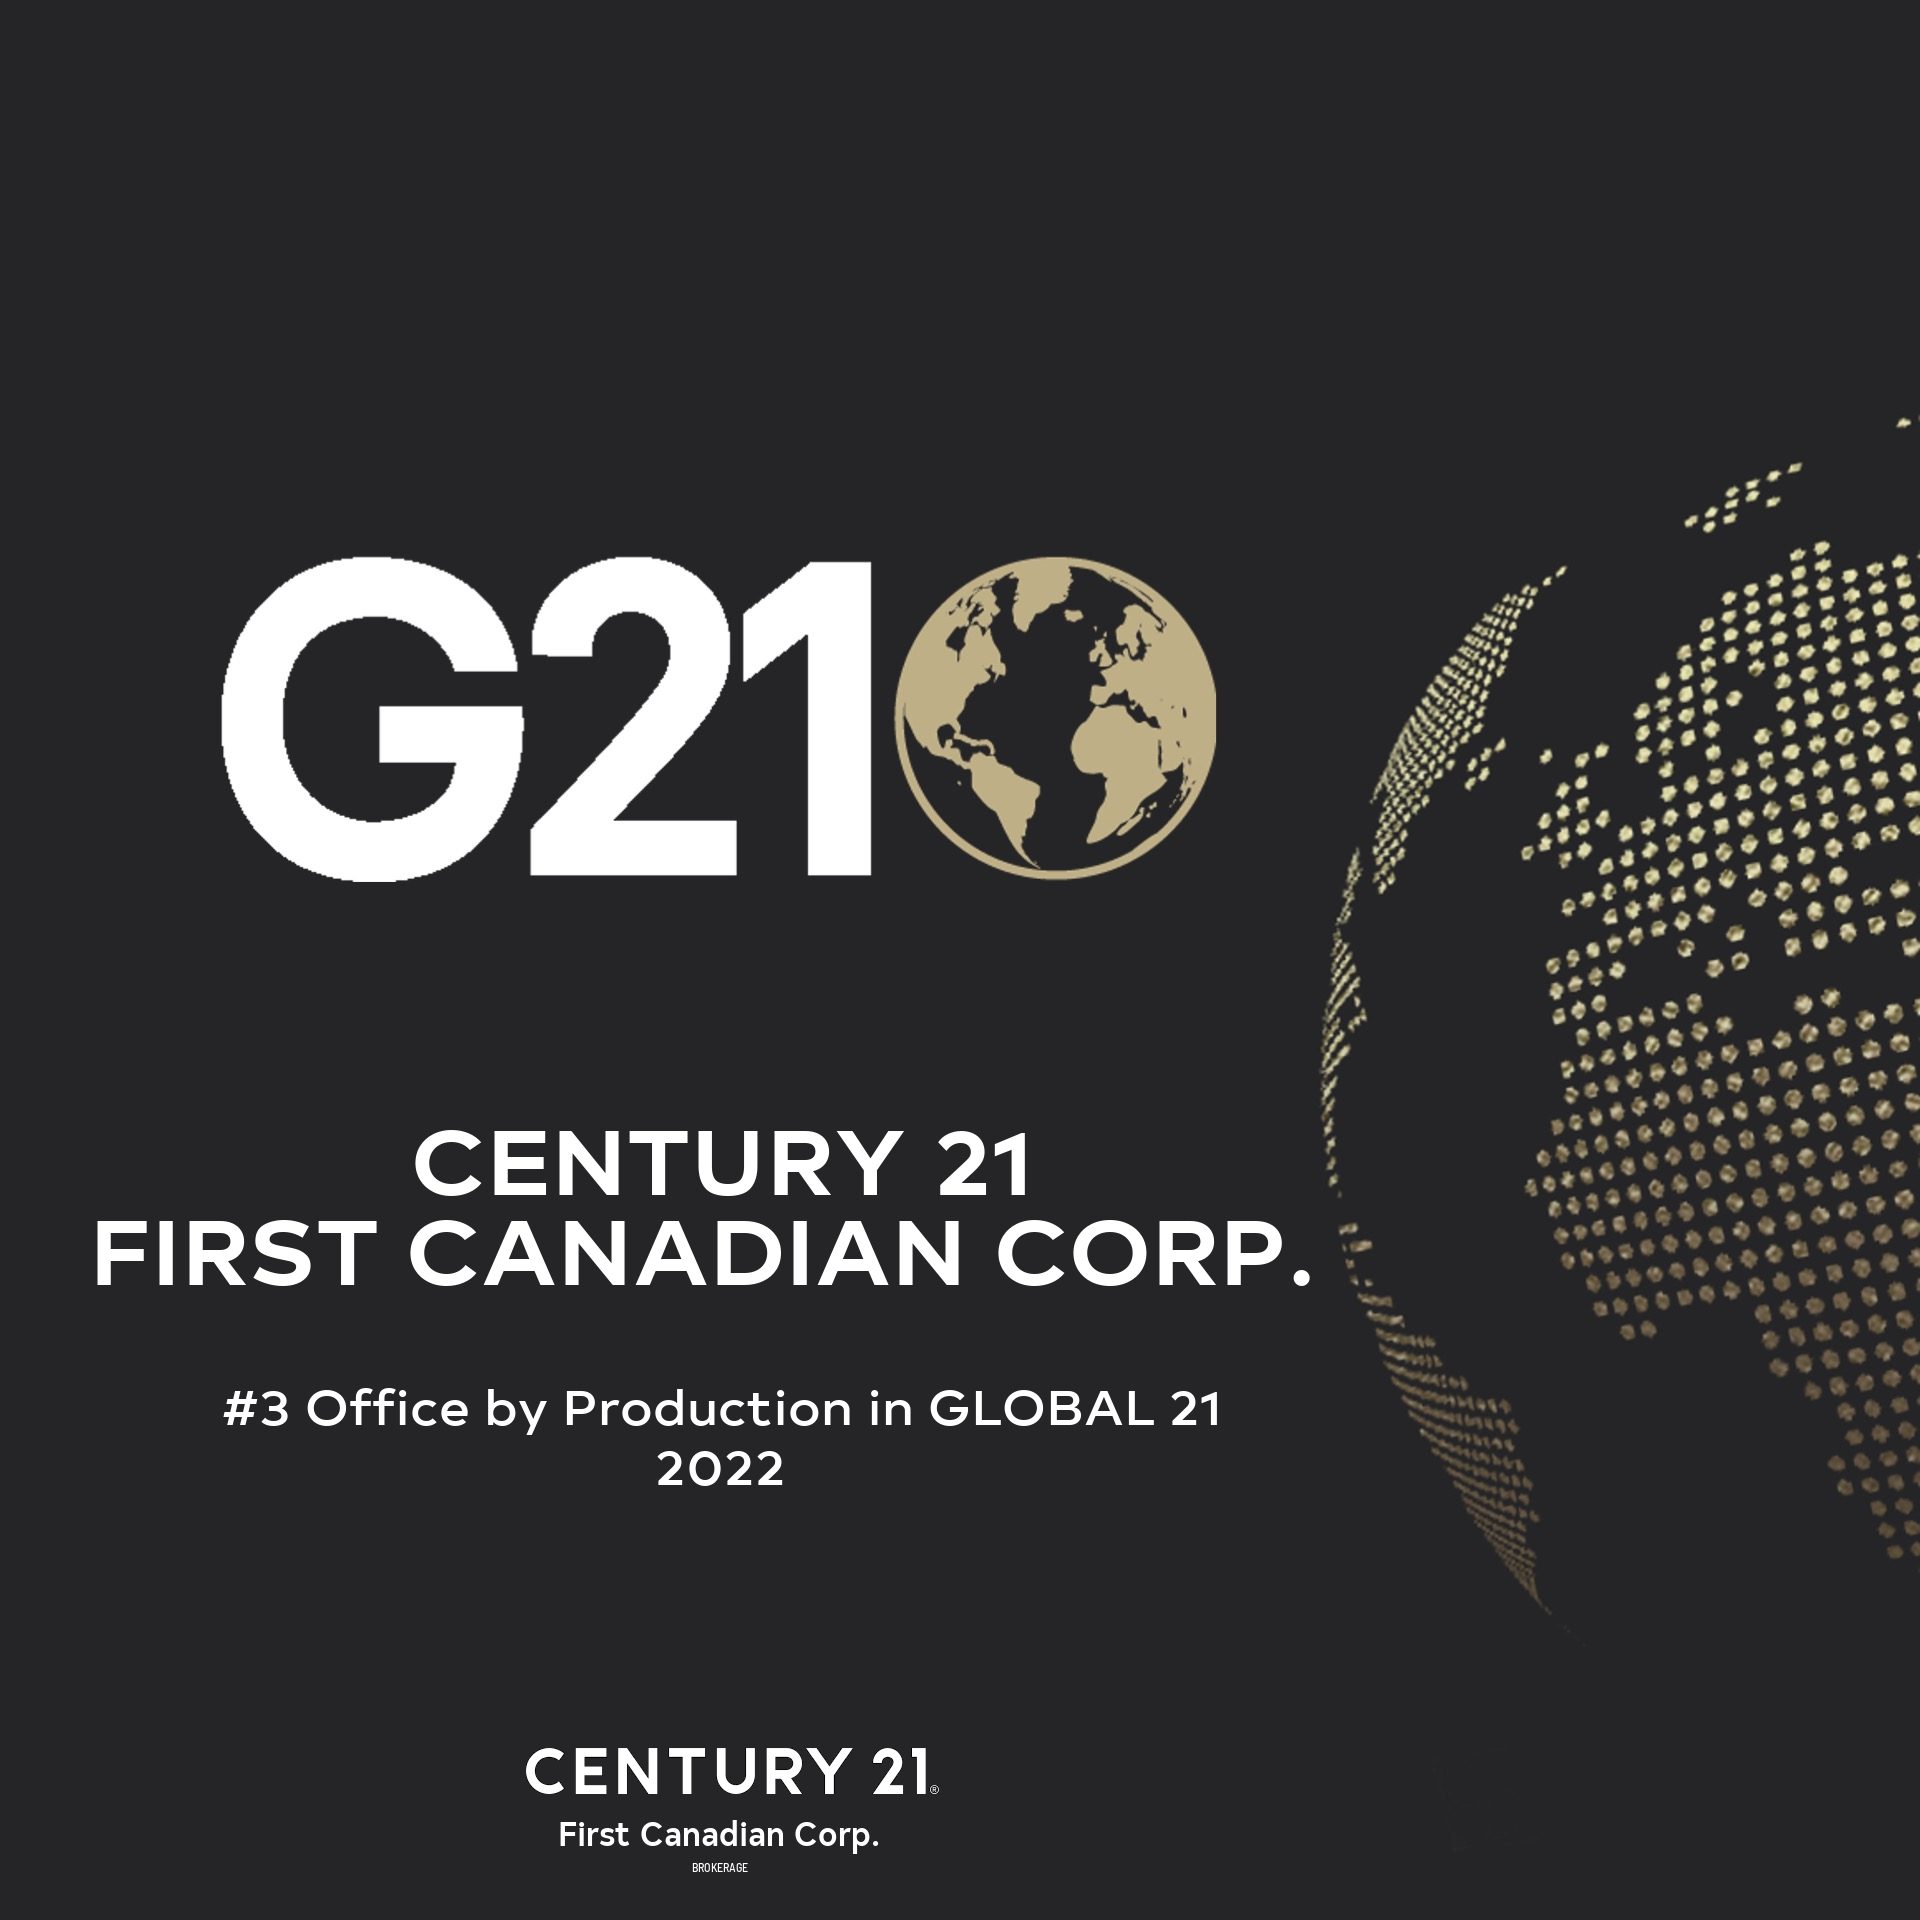 #3 Office by Production in Global 21 for Century 21